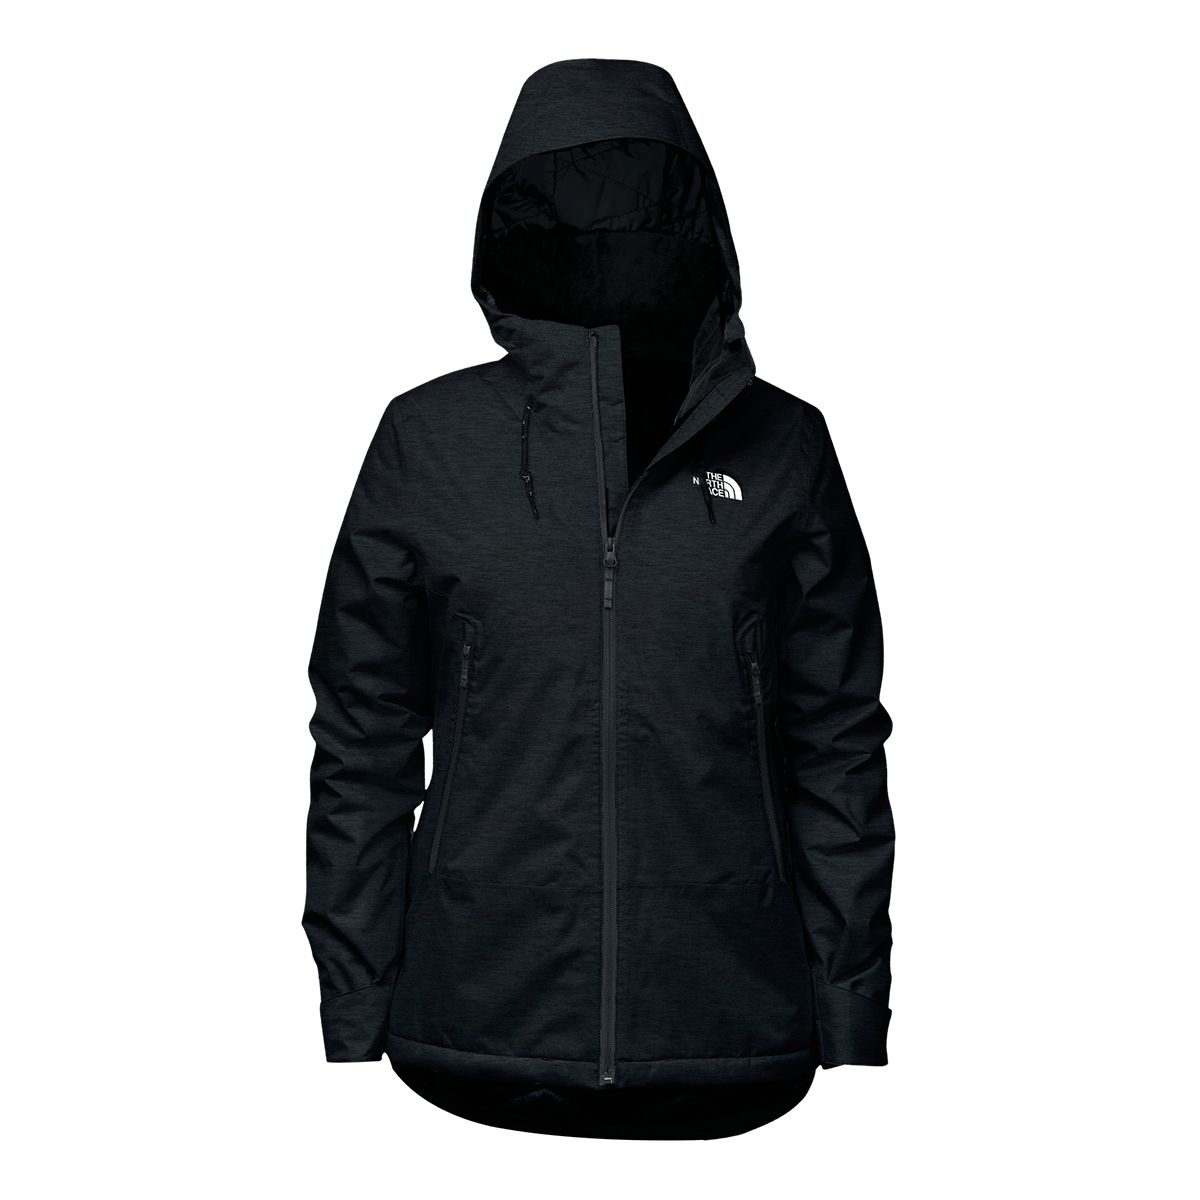 The North Face Women's Midlayer Jacket Insulated Hooded Water-Repellent | Bayshore Shopping Centre